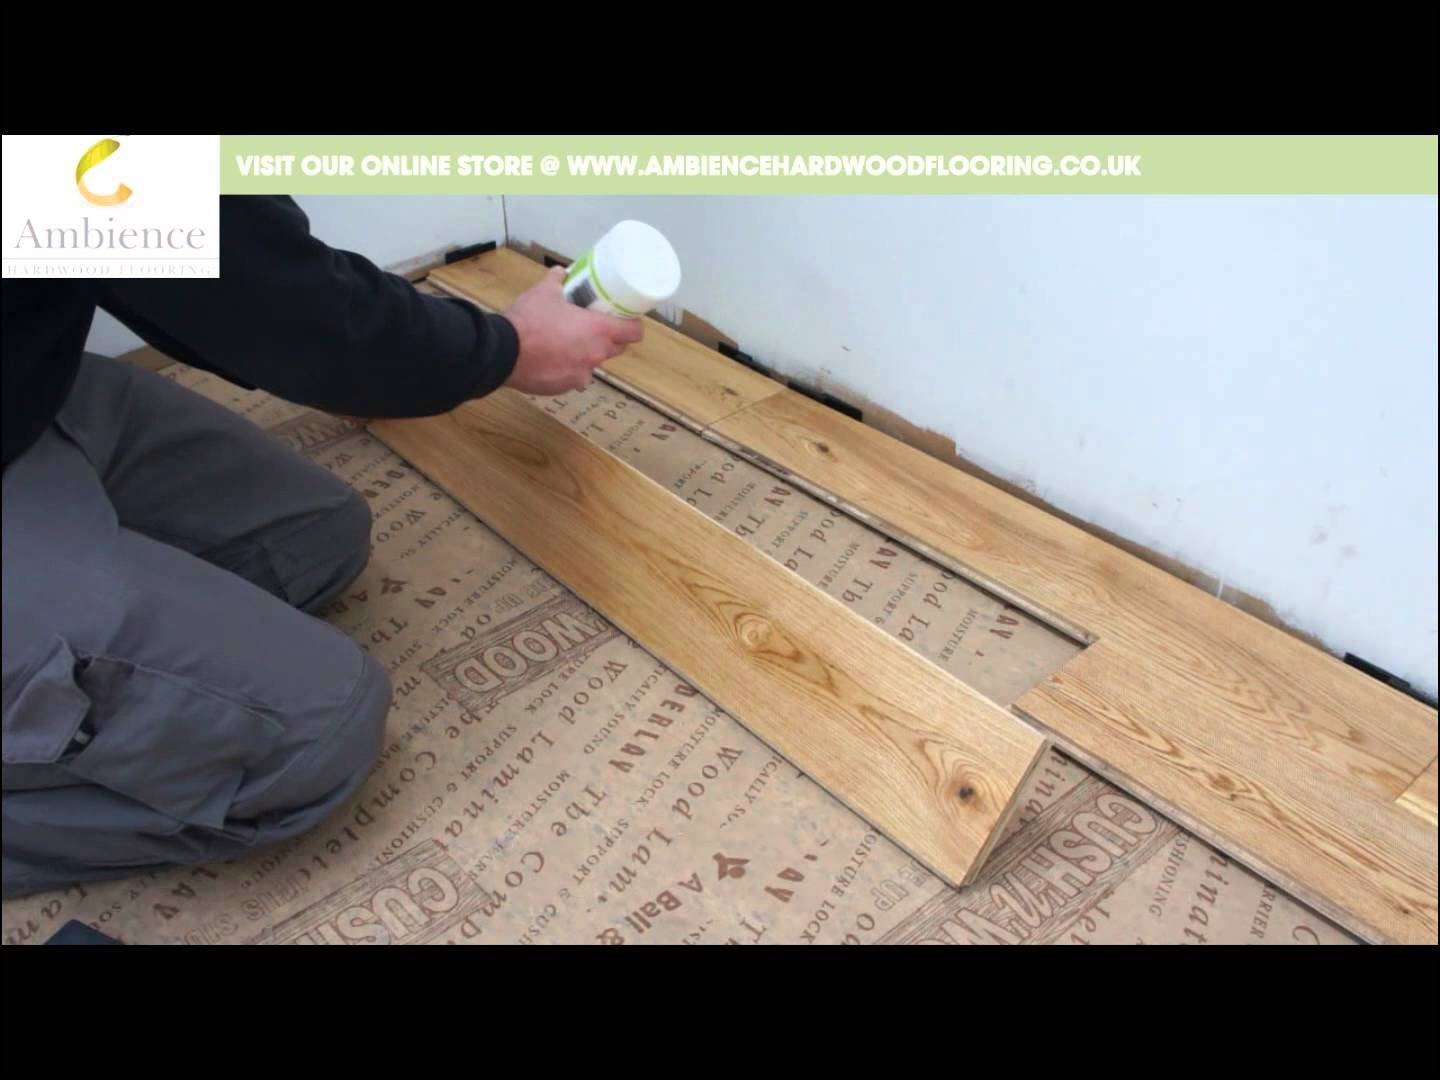 how to install tongue and groove hardwood flooring of floating tongue and groove bamboo flooring collection how to install with regard to floating tongue and groove bamboo flooring images laminate flooring how to lay tongue and groove laminate